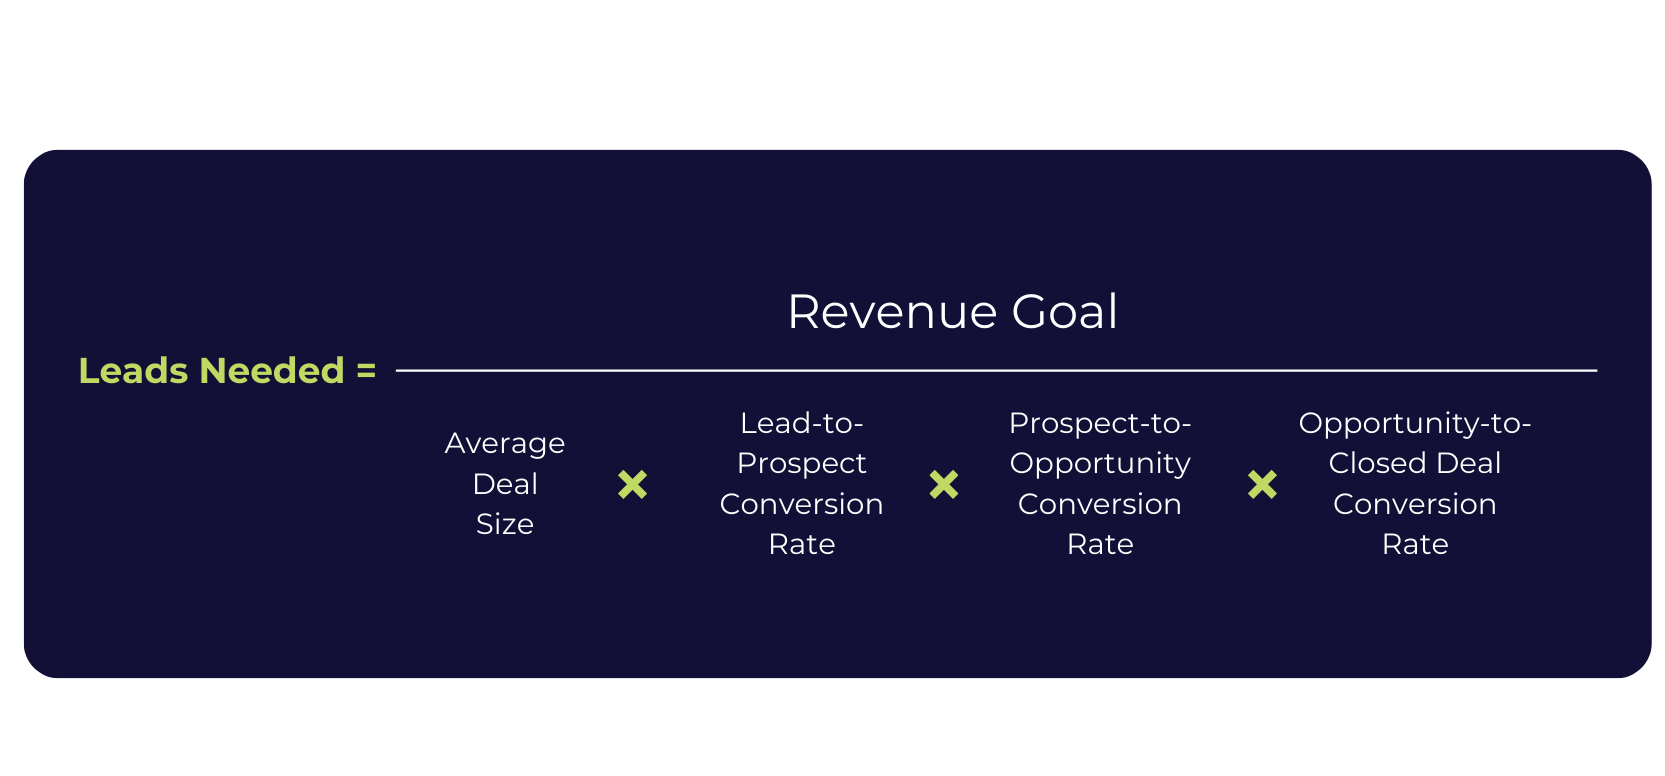 Leads Needed = Revenue Goal / (Average Deal Size * Lead-to-Prospect ConversionRate * Prospect-to-Opportunity Conversion Rate * Opportunity-to-Closed Deal Conversion Rate)